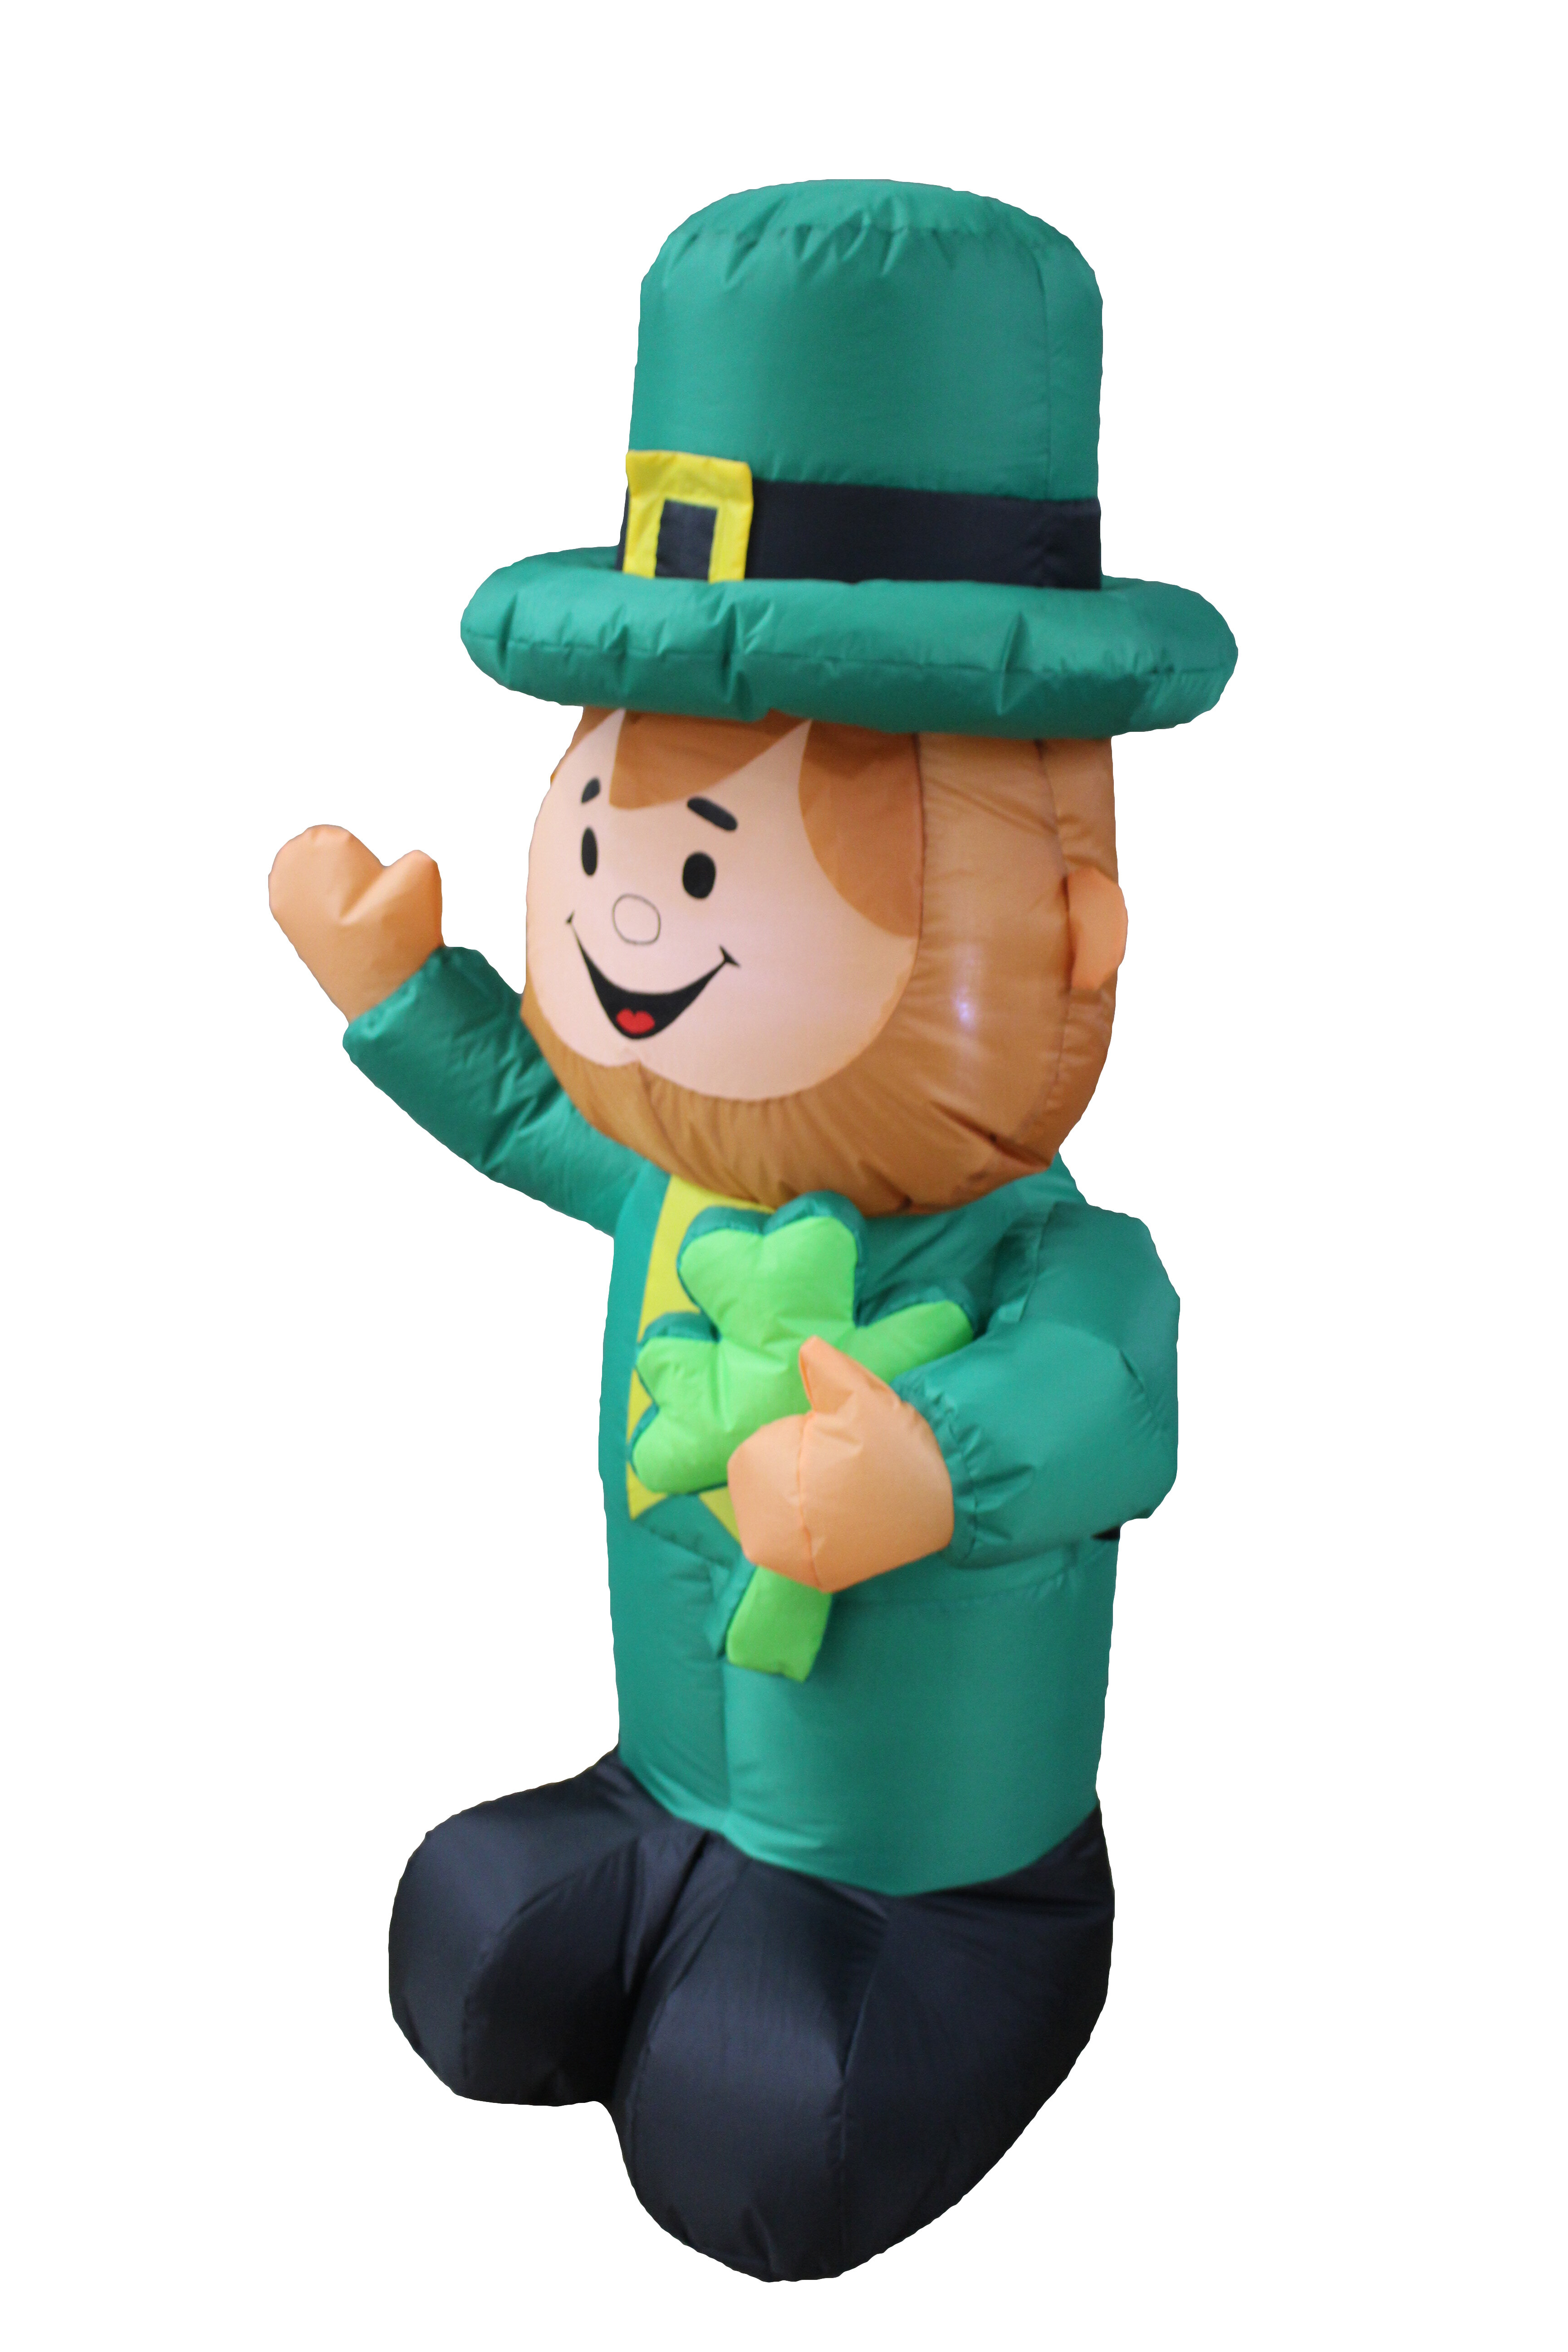 Ohstgp 5.9 Ft St Patrickâ€™s Day Inflatables Outdoor Inflatables Leprechaun with LED Light Holding Four-Leaf Clover Irish Leprechaun Inflatable Lighted Decoration